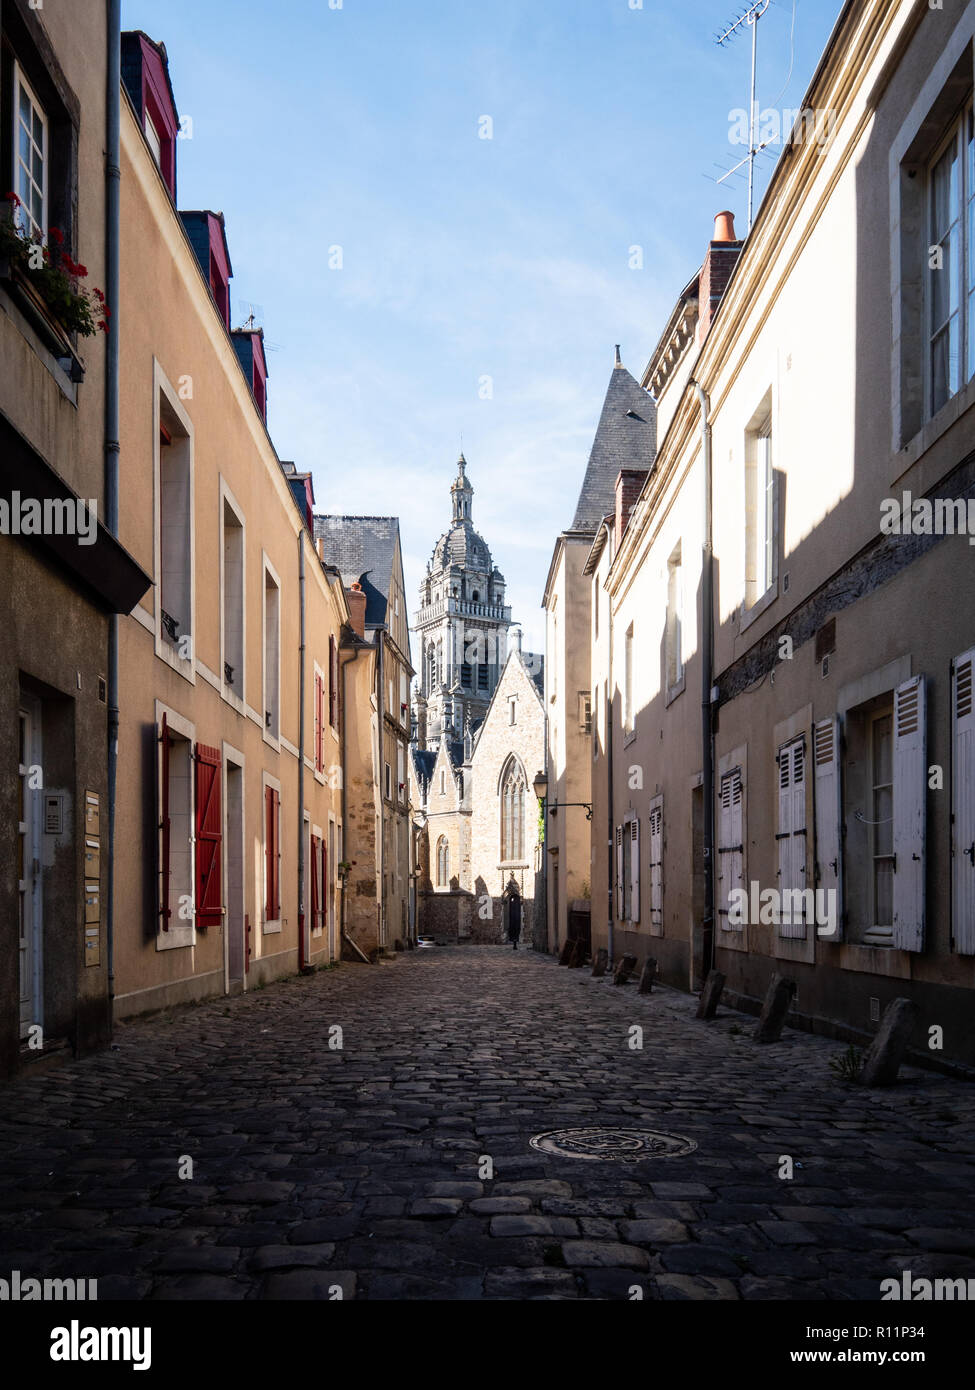 Paved street of the old town of Le Mans. Le Mans is a city in western france. It's a located in the Pays de la Loire region. Stock Photo